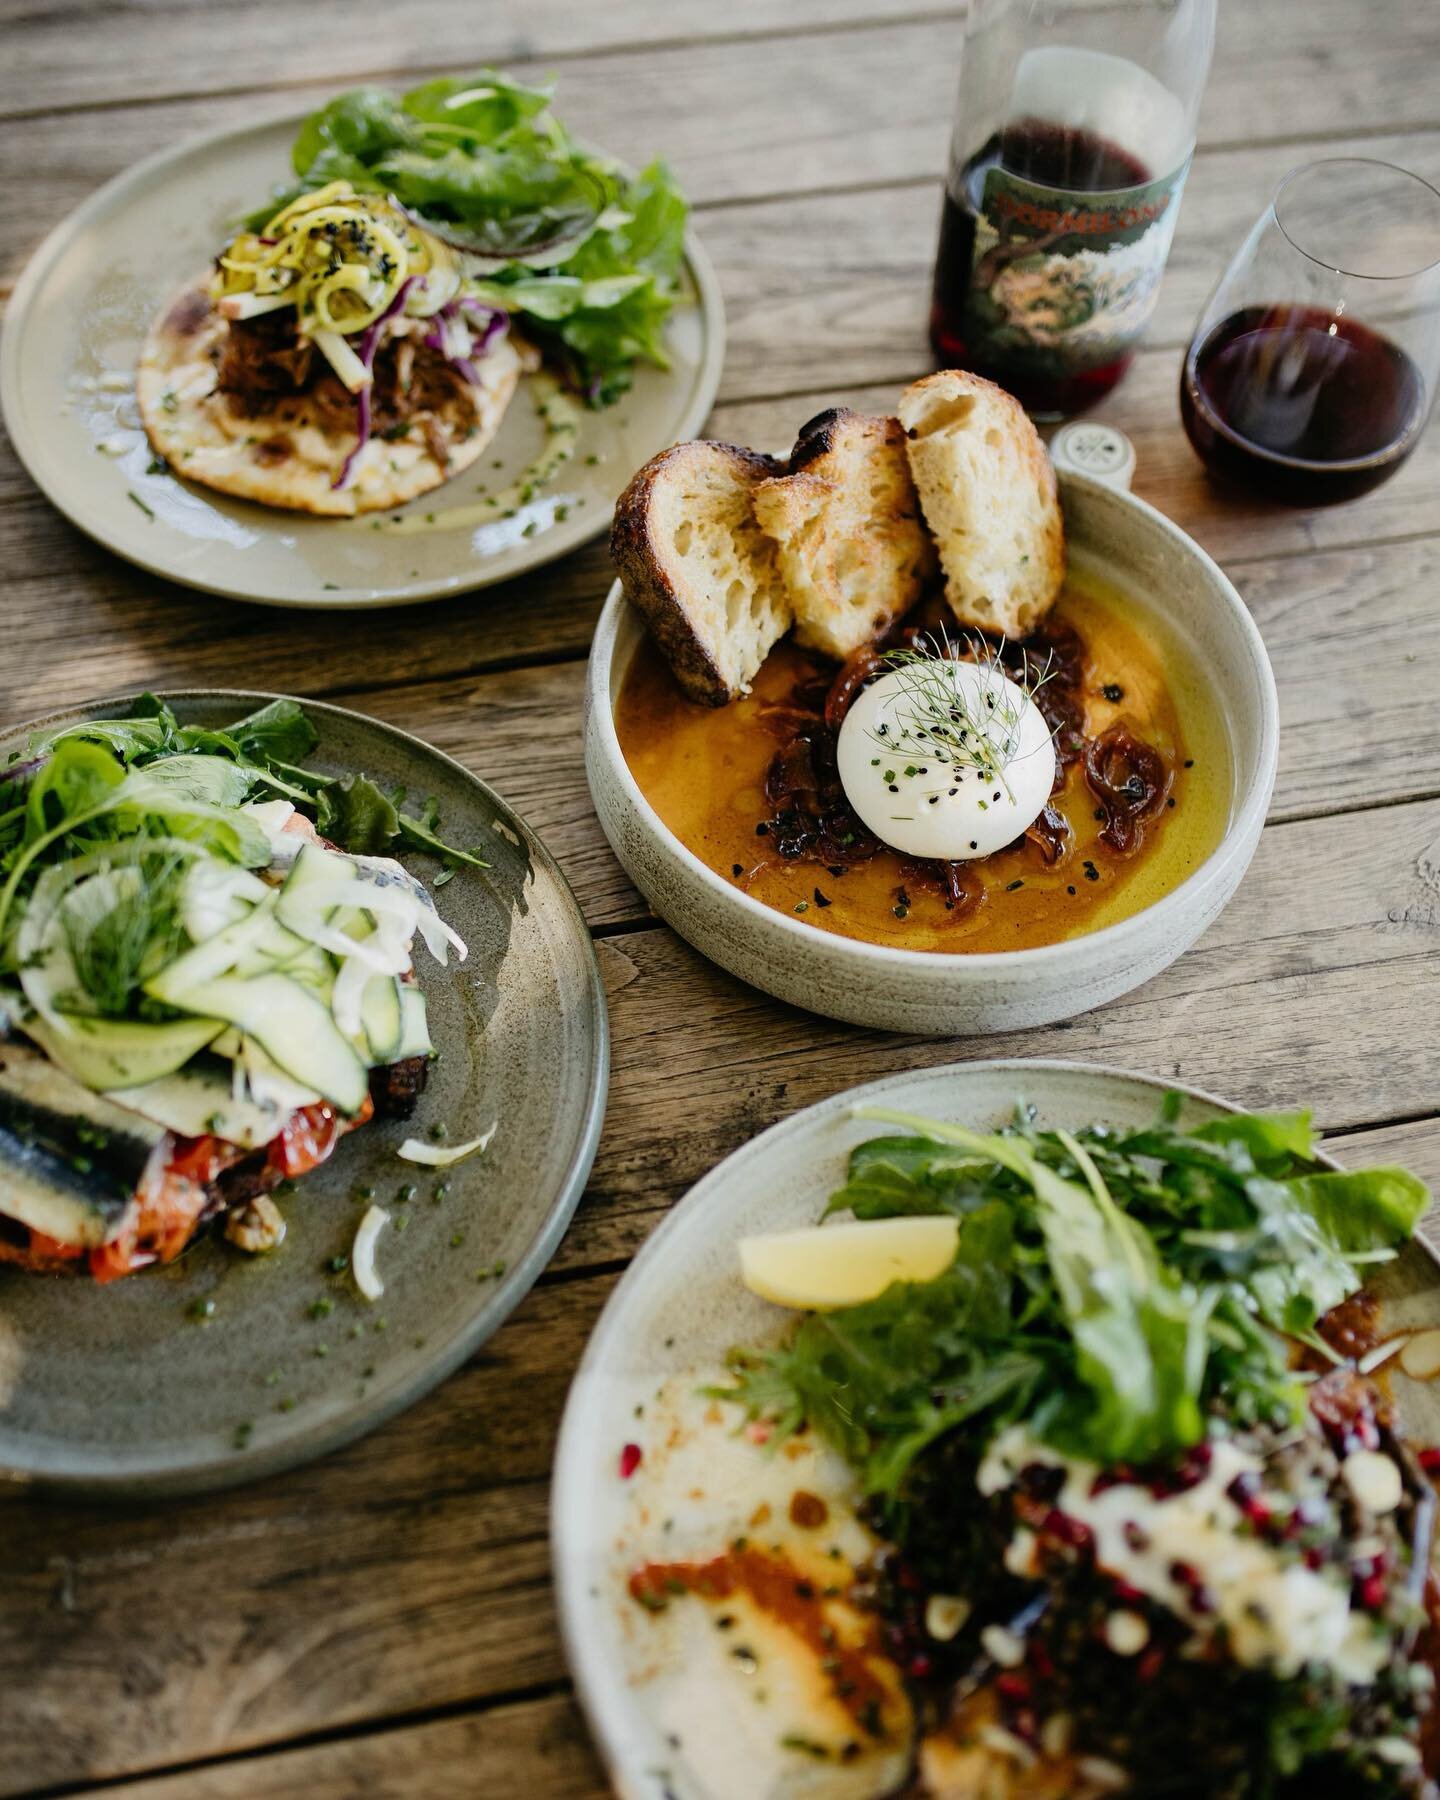 Lunch plans? Book our private dining area for the ultimate long lunch feast with friends. Choose our sun drenched farm Haus courtyard, old cheese factory loading dock for an enclosed nook or in the main eatery by the fire. Grab your friends, bring yo